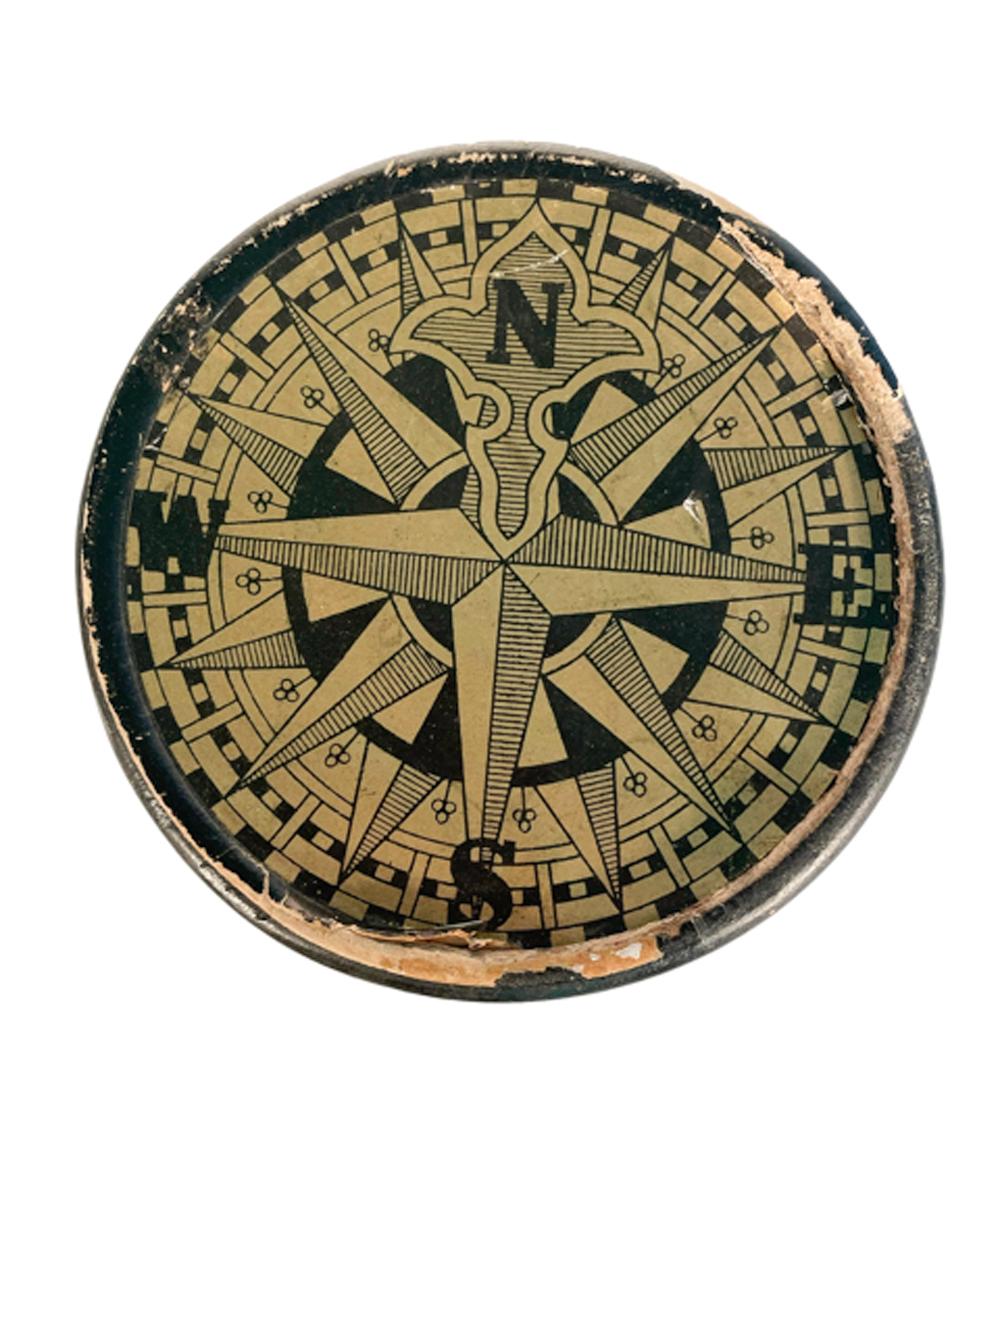 Mid-20th Century Porcelain Drink Coasters, Sailing Ships in Black W/Gold Accents For Sale 2